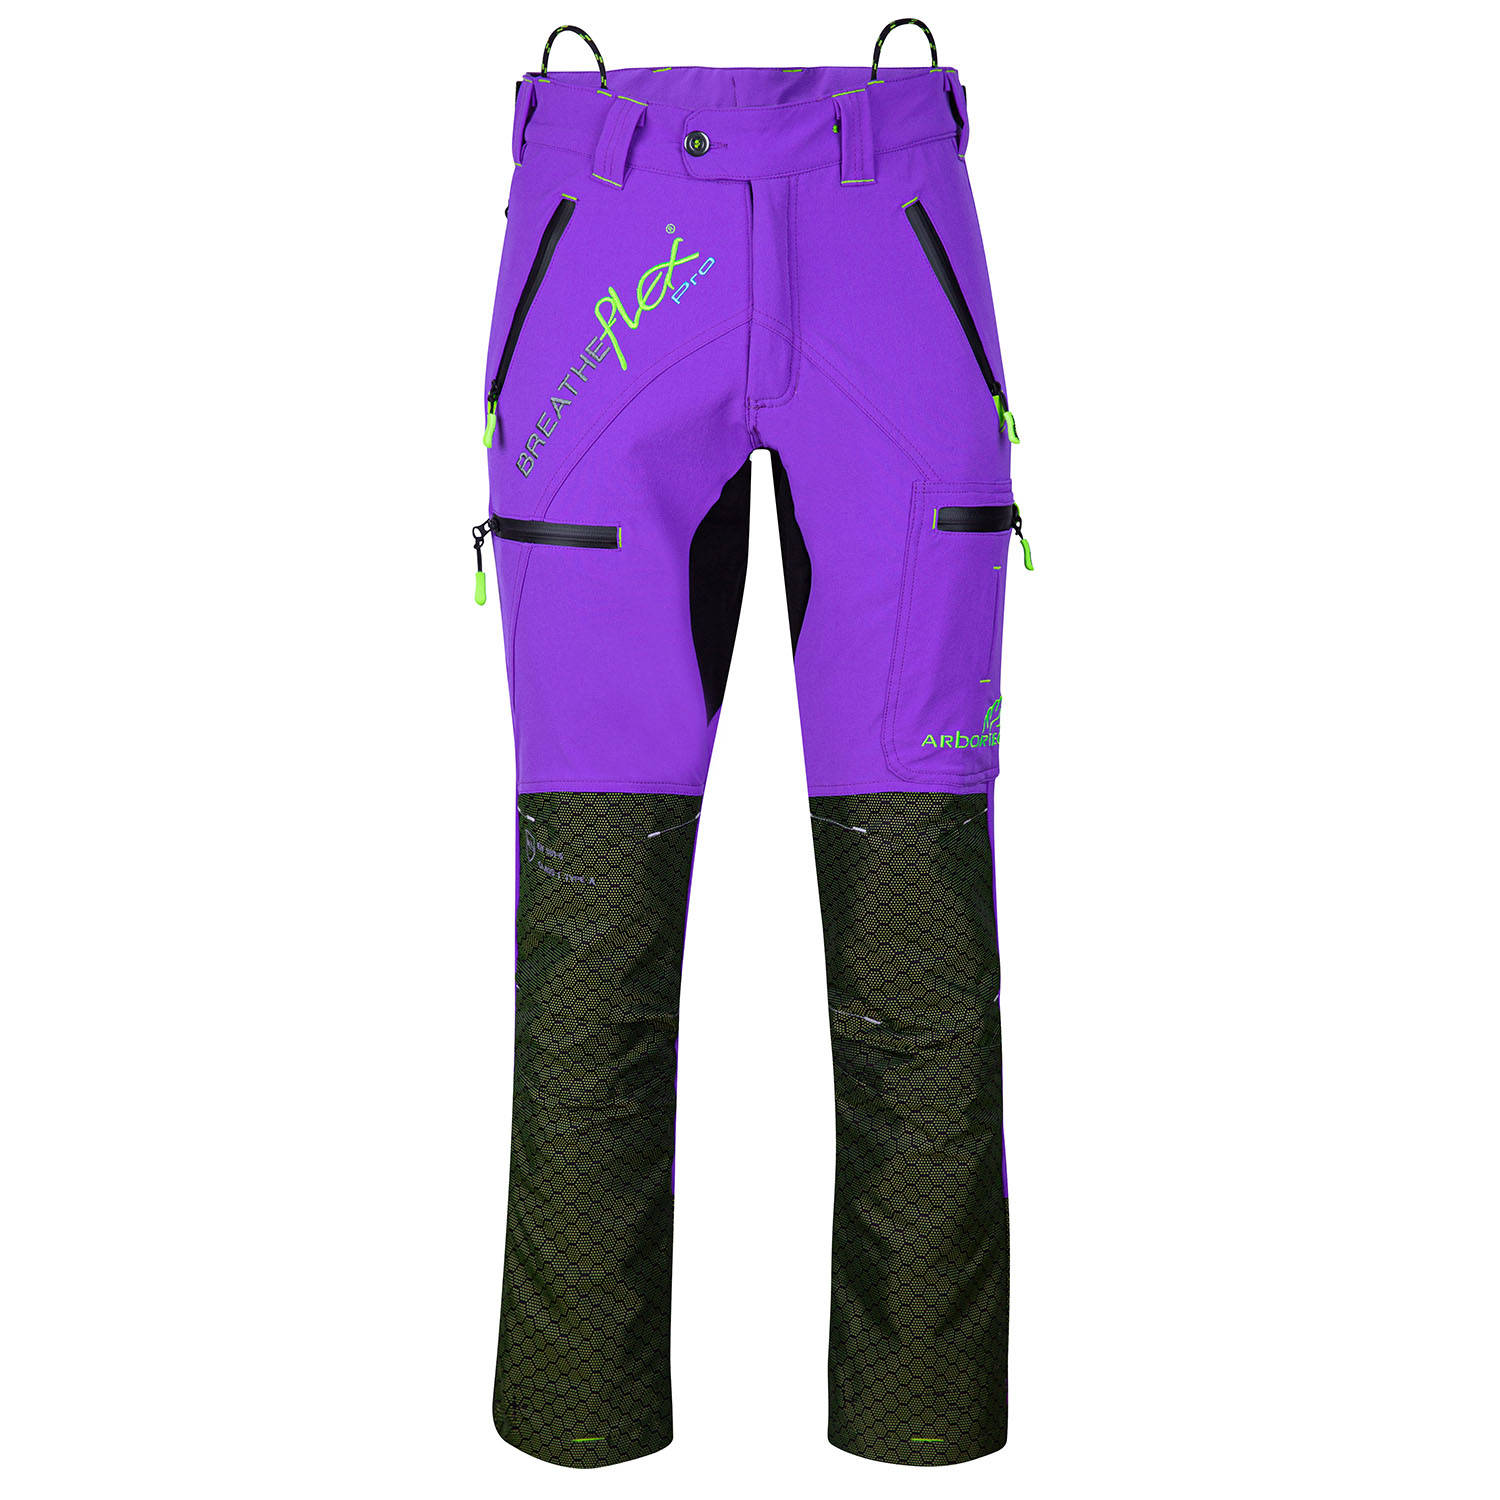 Arbortec AT4010F Womens Breatheflex Chainsaw Trouser Type A Class 1  All  Clothing  Protection  Uniforms Workwear Specialist Equipment  PPE  Suppliers